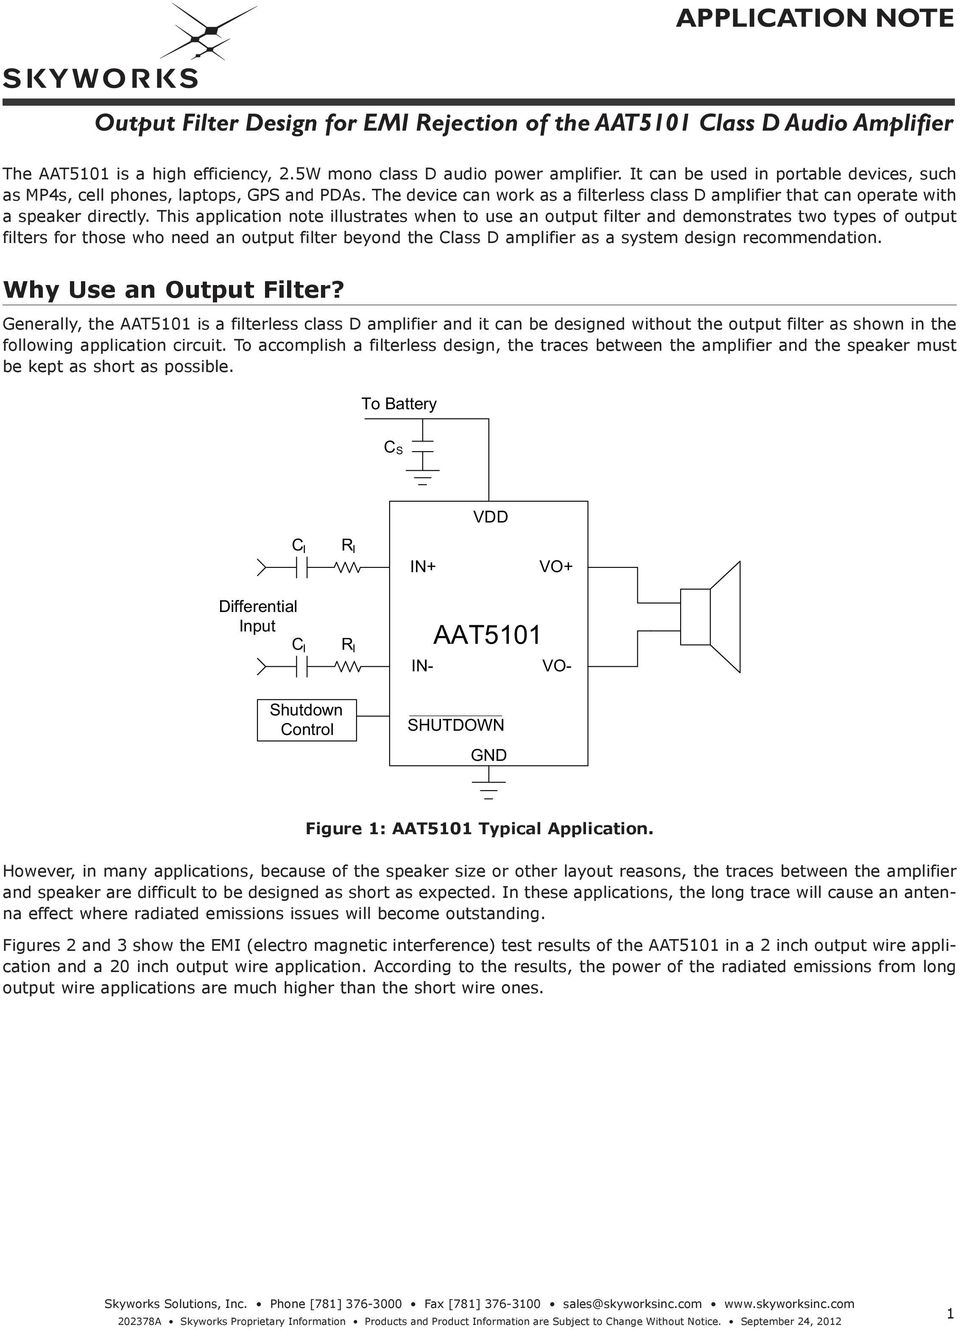 This application note illustrates when to use an output filter and demonstrates two types of output filters for those who need an output filter beyond the Class D amplifier as a system design